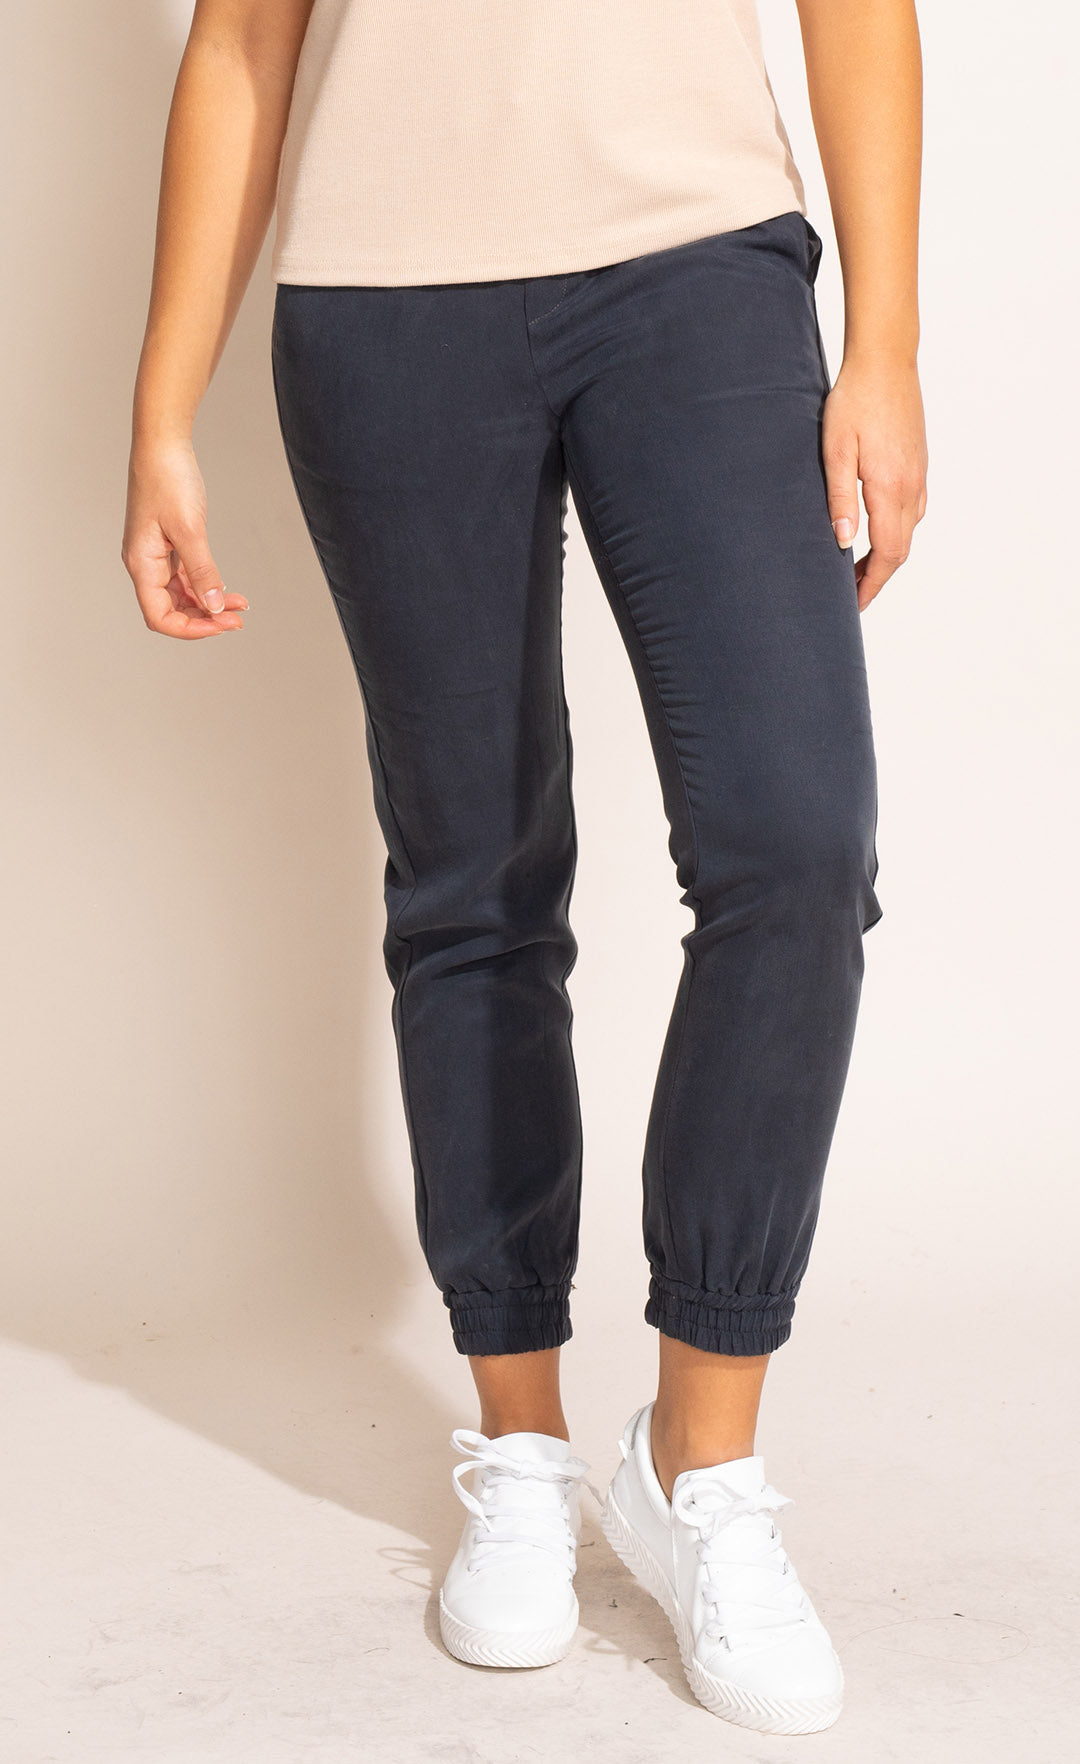 The Regina Pants - Pink Martini Collection